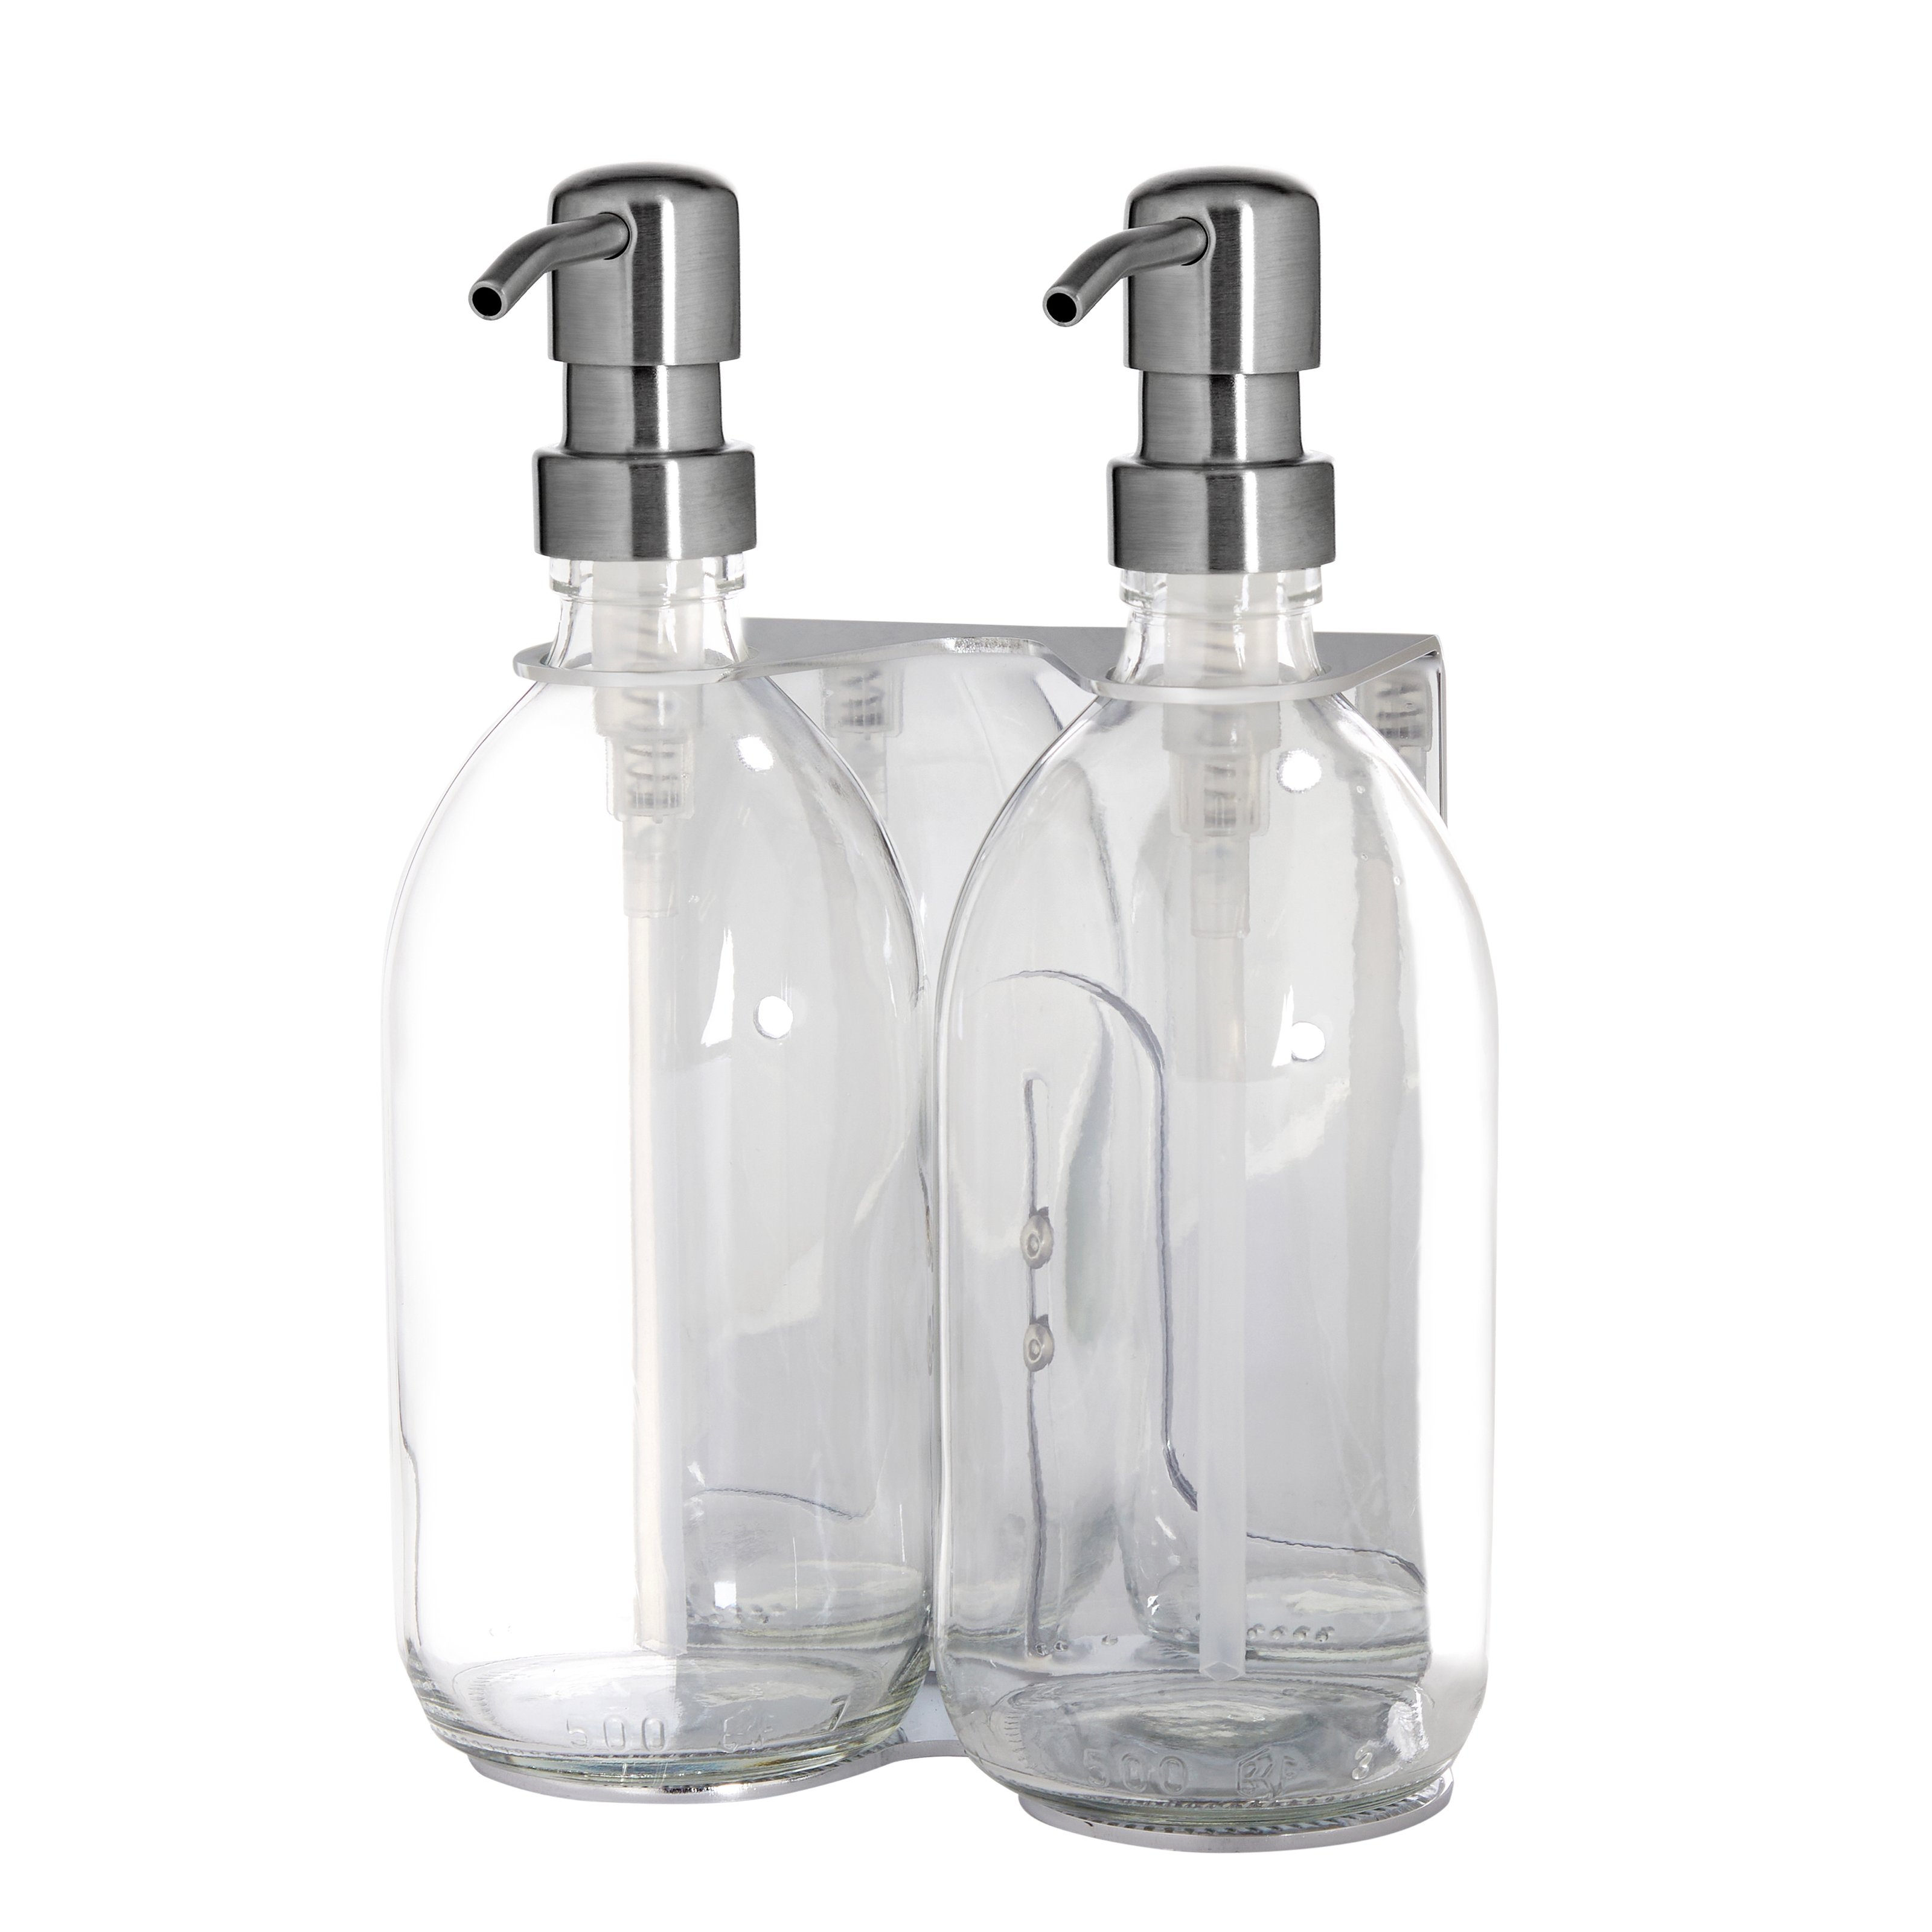 Chrome wall mounted soap dispenser with clear bottles and Silver metal pumps